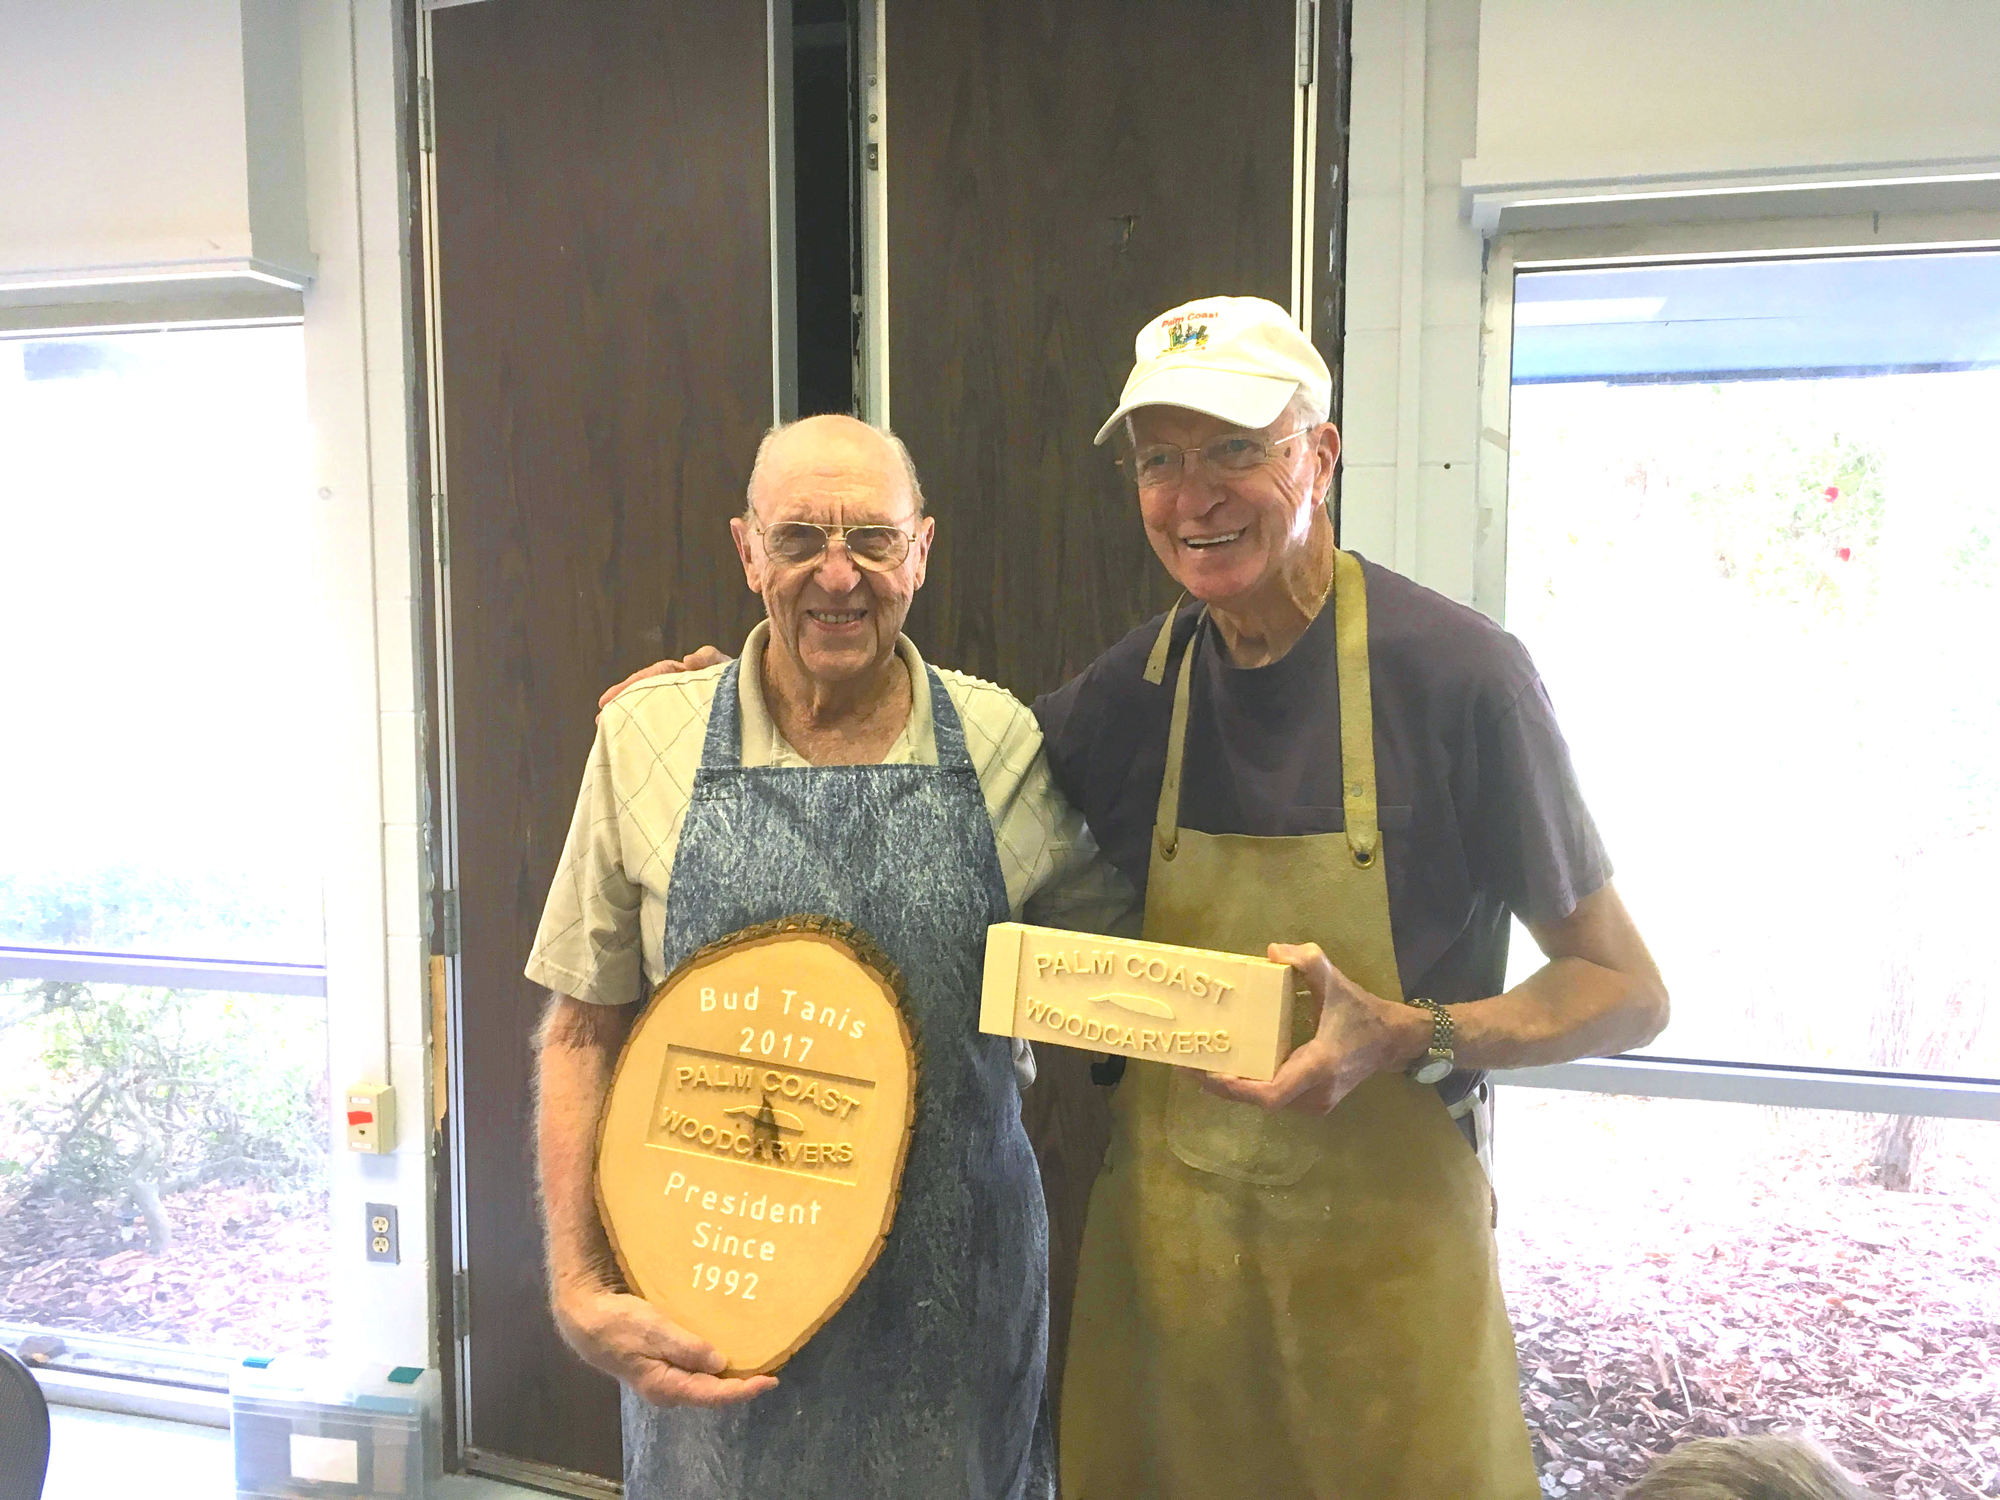 Former Woodcarvers President Bud Tanis, with new President Howard Hawrey. Call Hawrey at 503-9542.